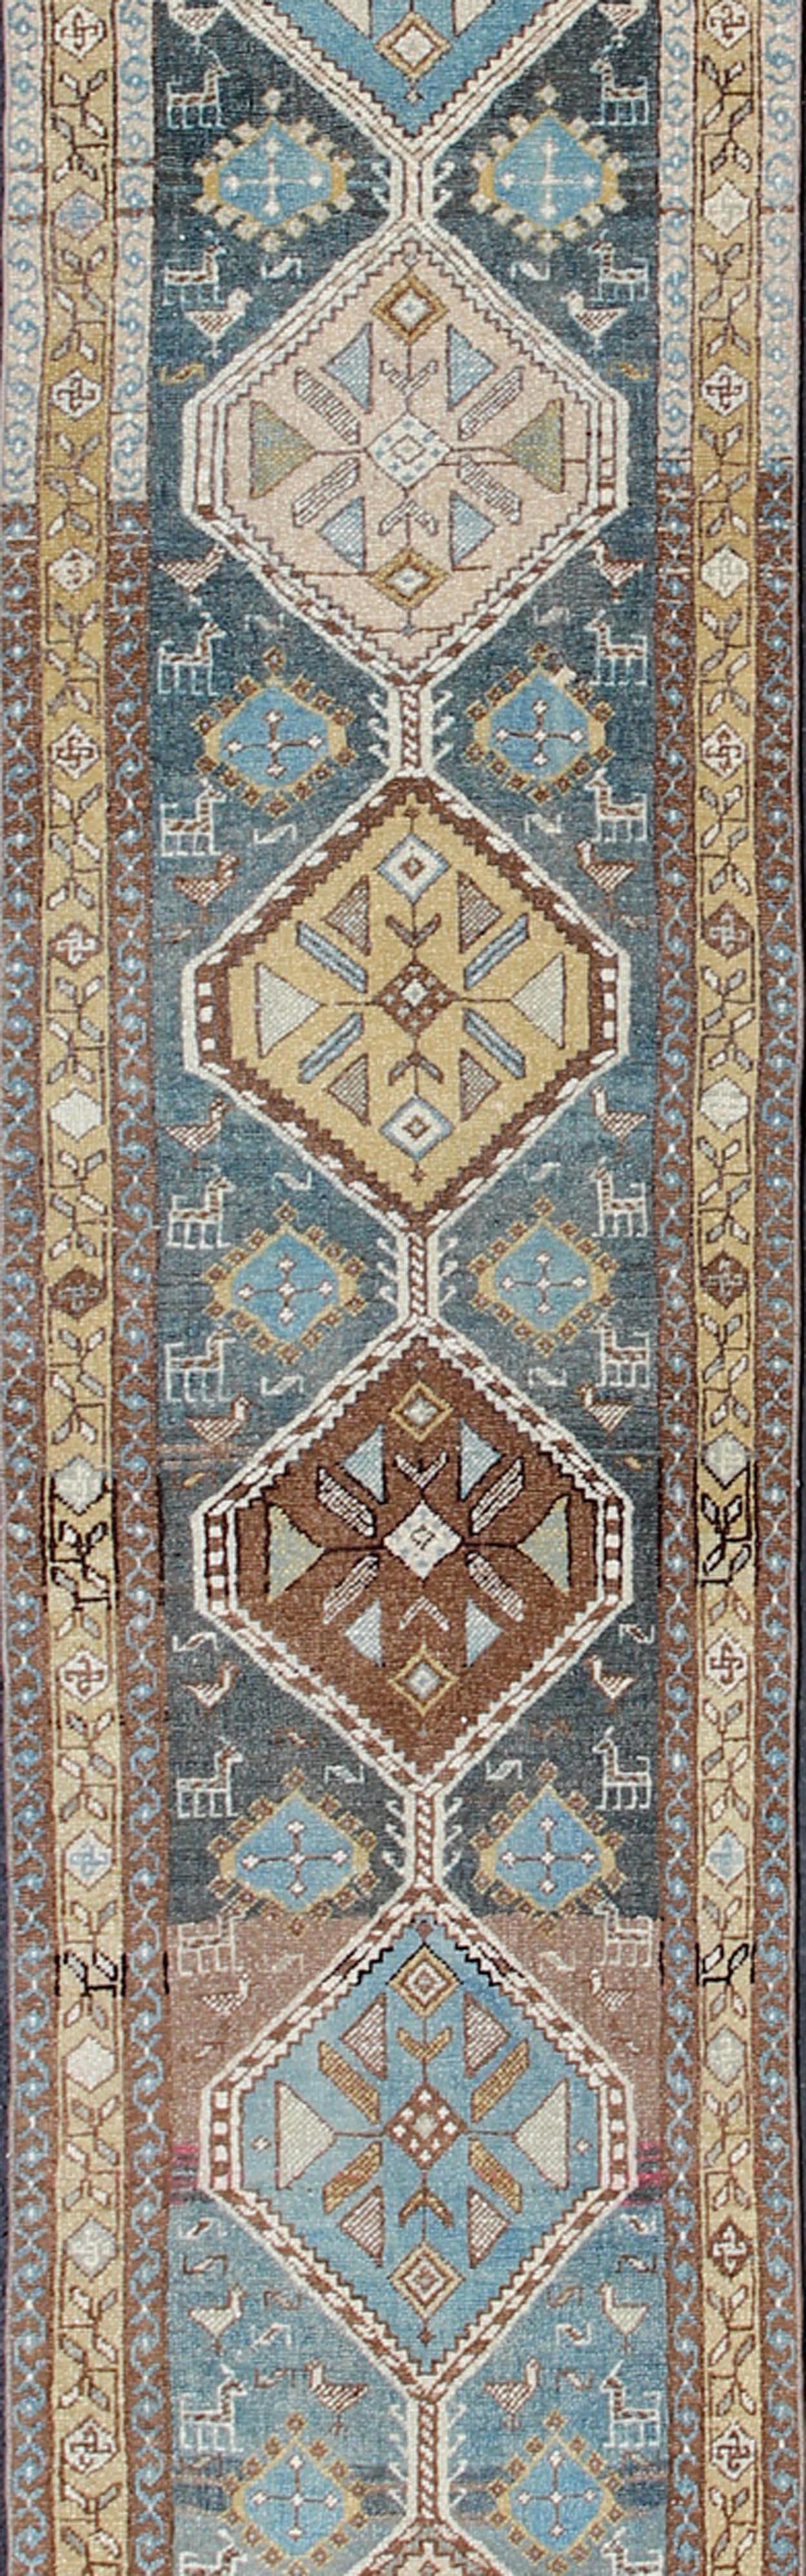 Heriz Serapi Shades of Blue and Gray Antique Persian Heriz Long Runner with Geometric Design For Sale